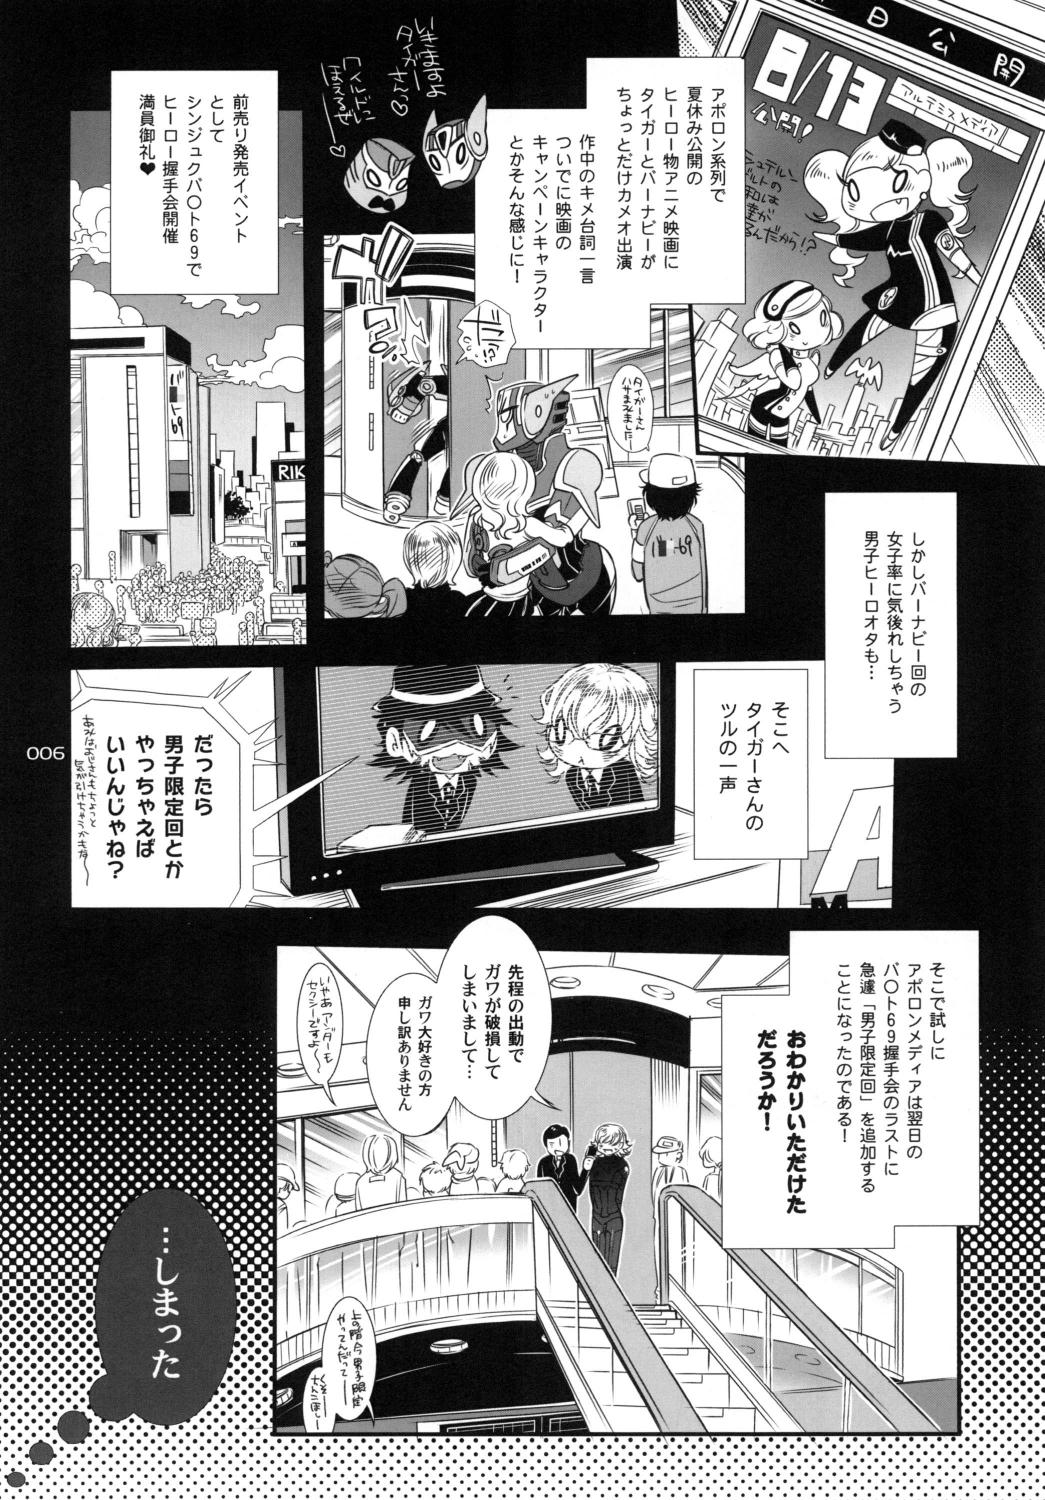 Face Fucking バ○ト69で僕と握手! - Tiger and bunny Rough Fucking - Page 6